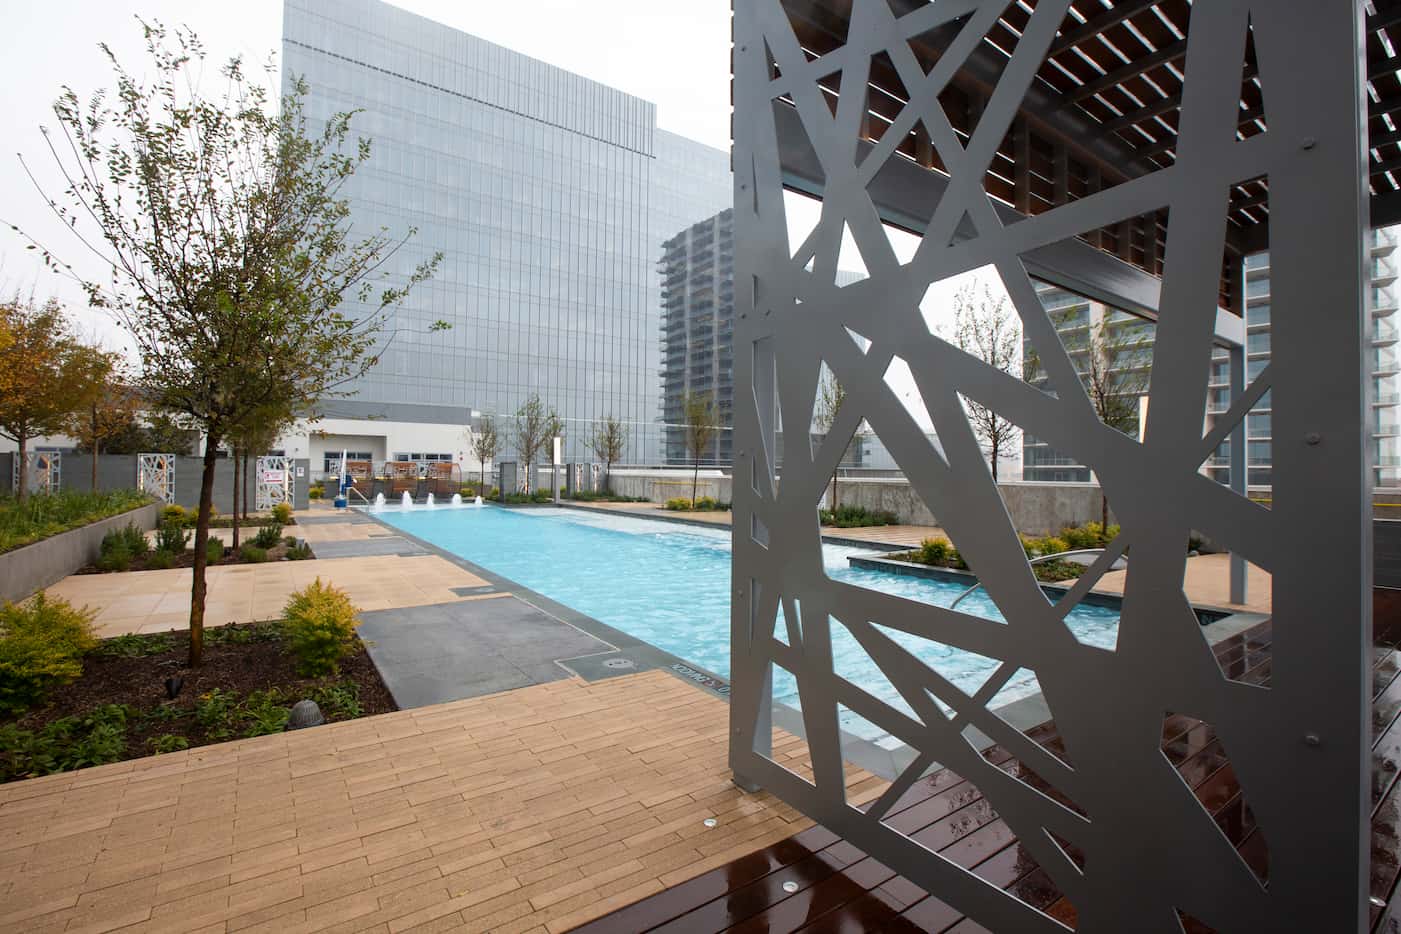 The eighth-floor pool deck the new LVL29 apartment high-rise in Plano on Tuesday, Nov. 5,...